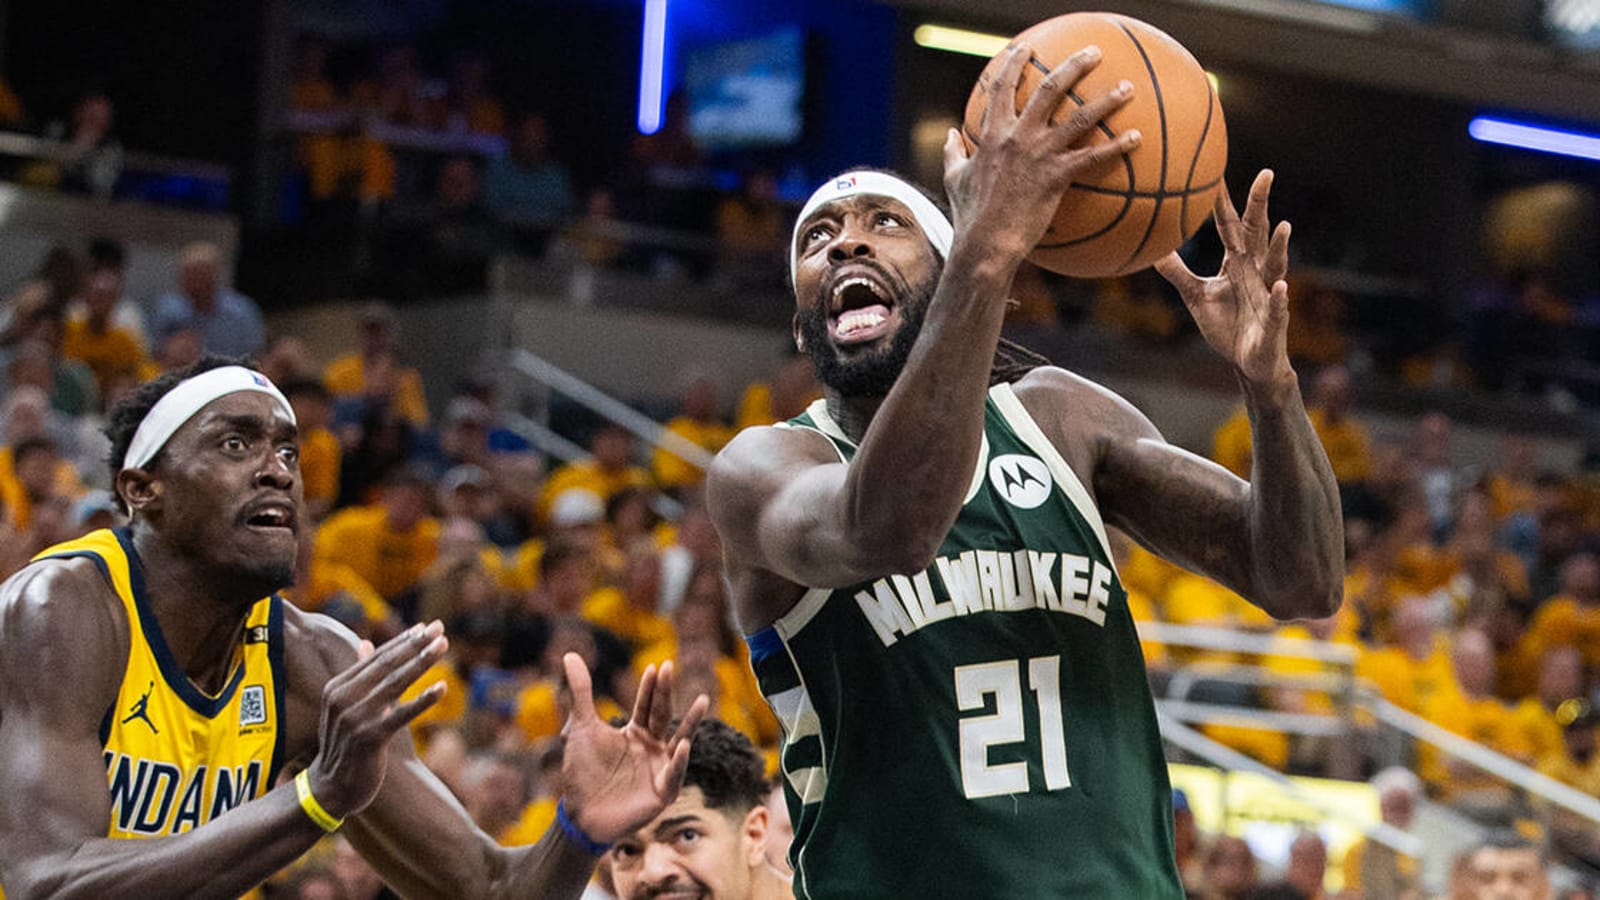 Indianapolis Police investigating Patrick Beverley, fan incident during Bucks-Pacers Game 6